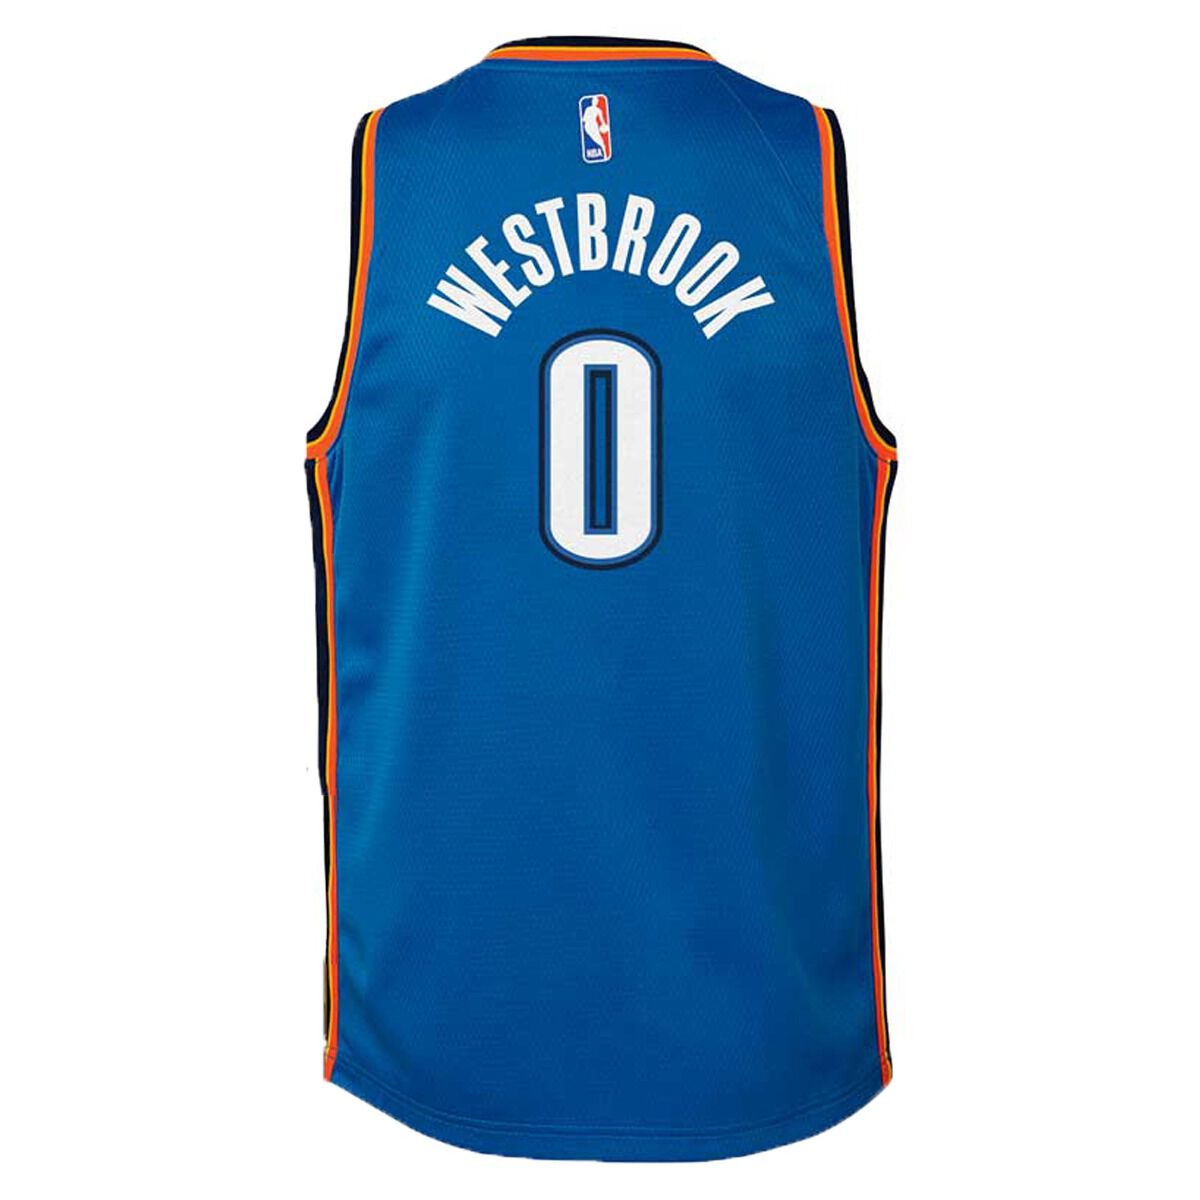 russell westbrook jersey mens small